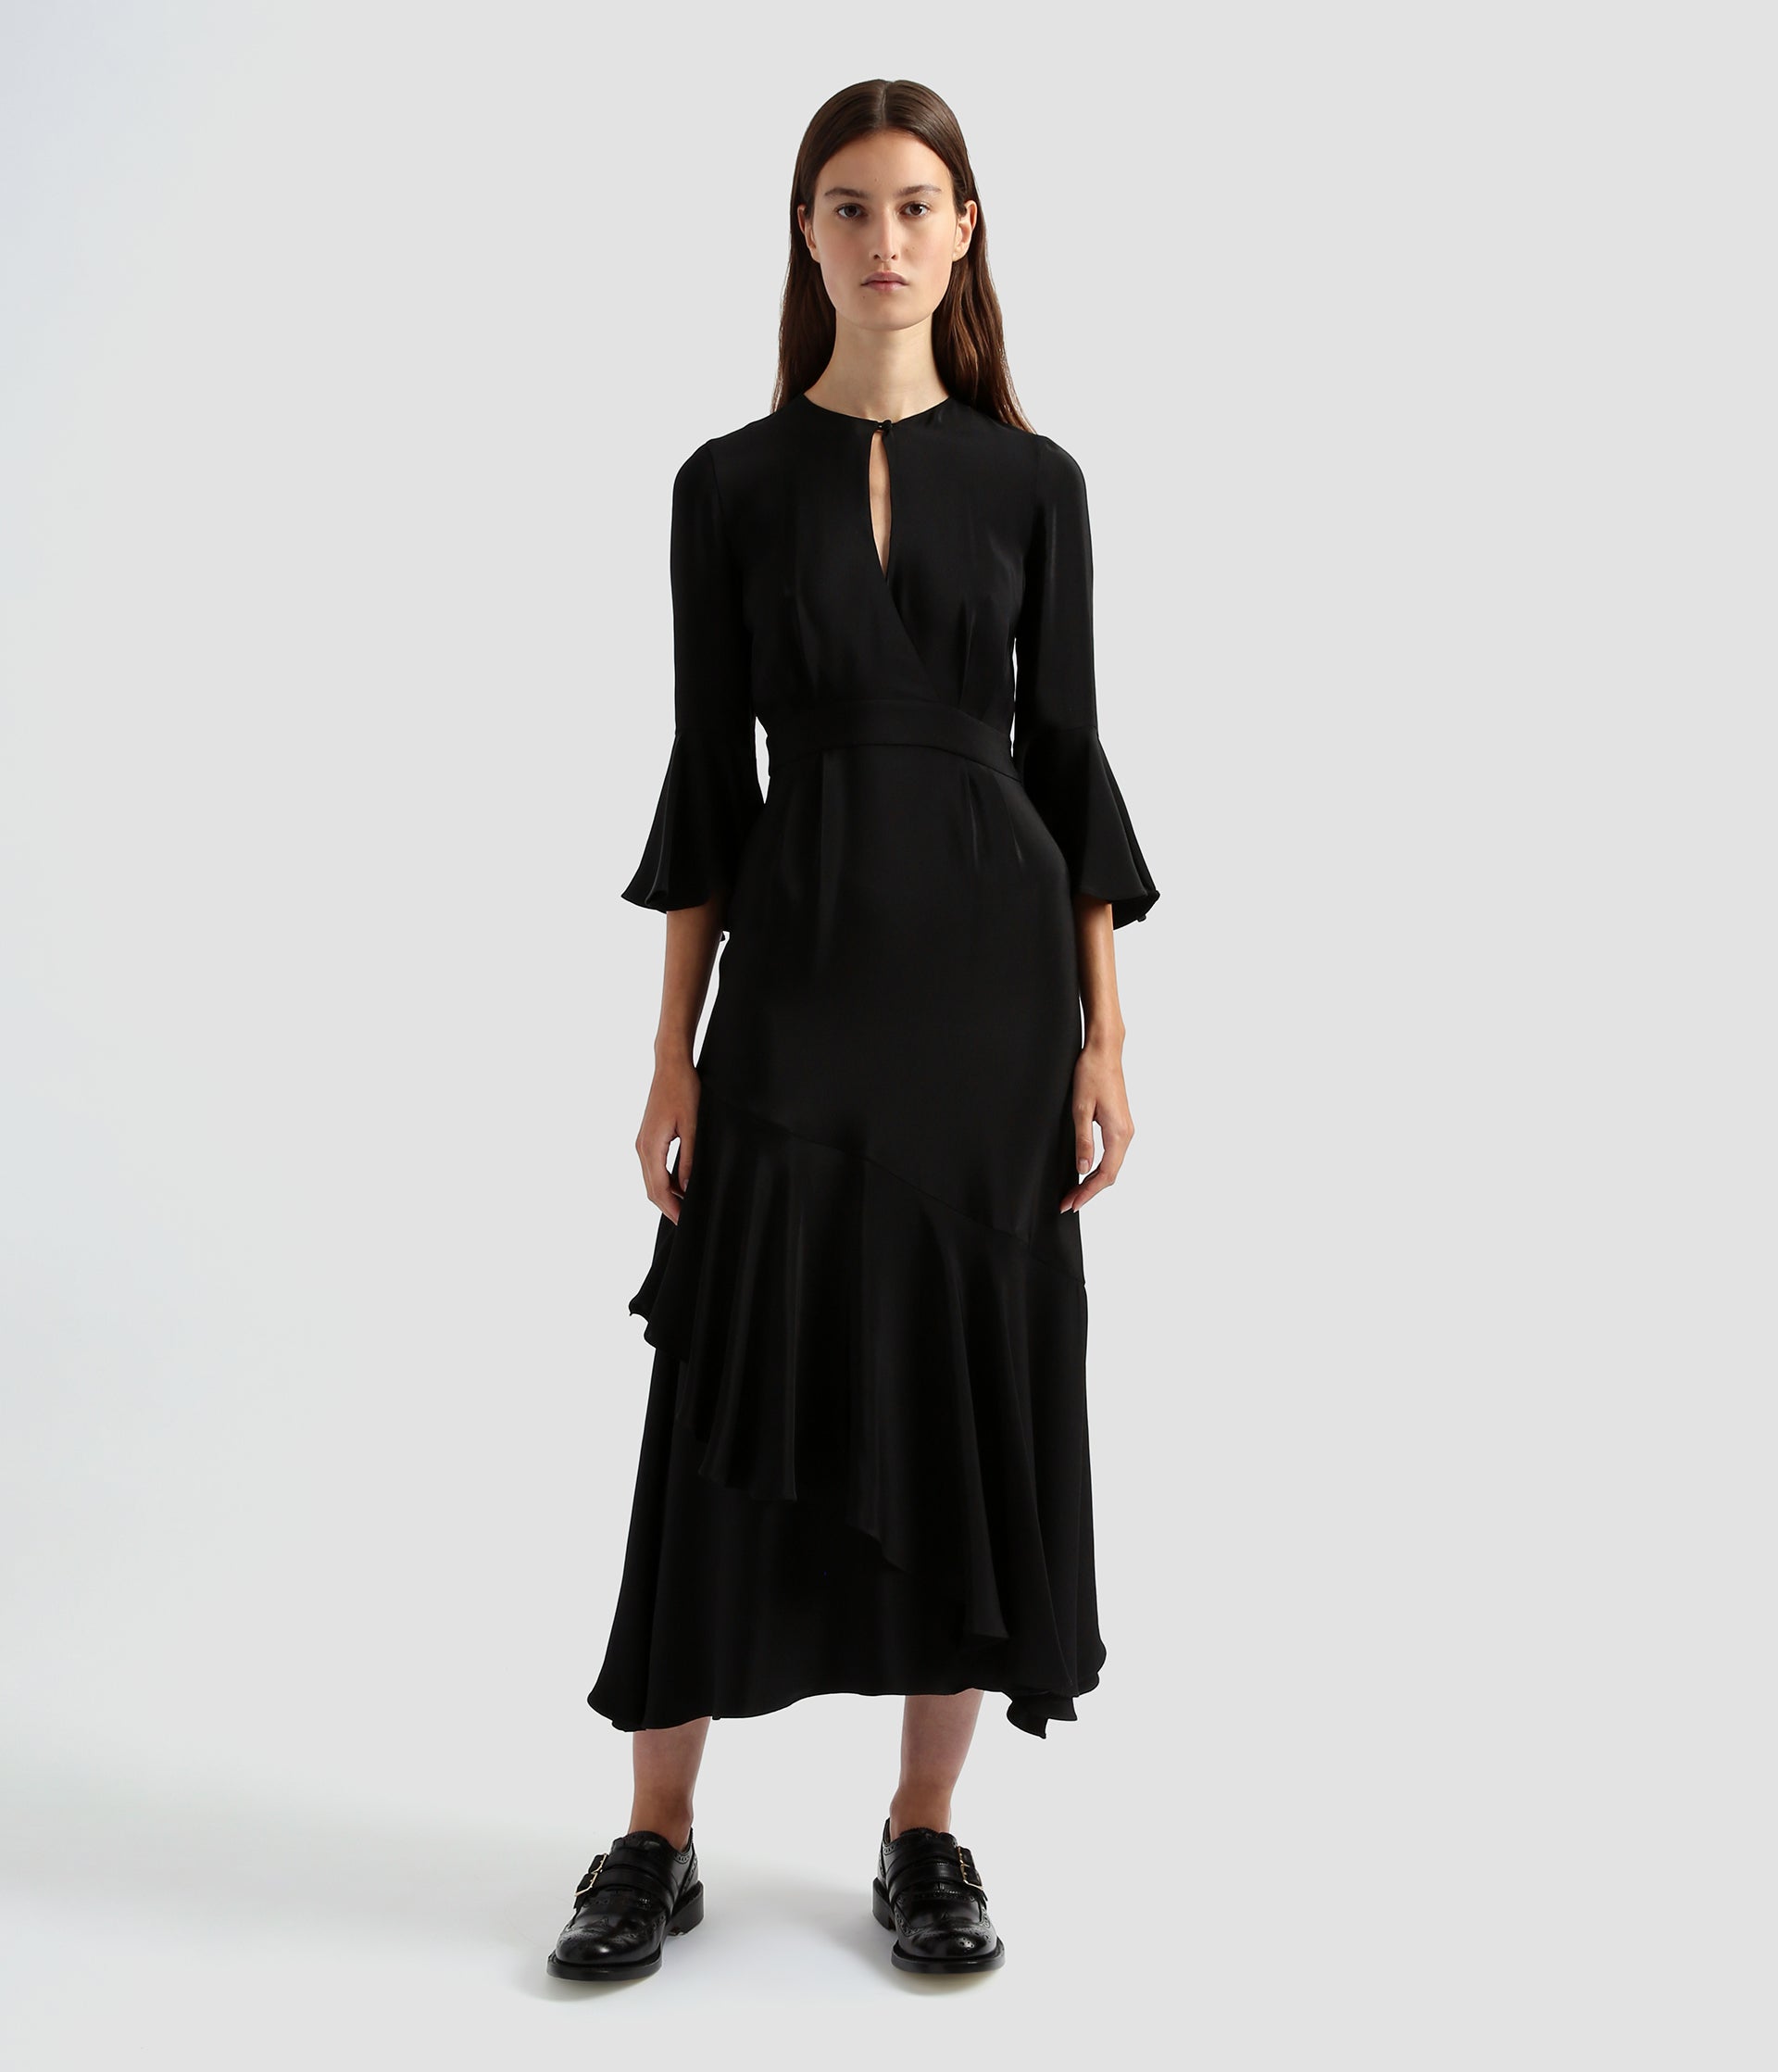 Florence dress by designer Erdem. Made from black silk crepe this florence dress features a tiered skirt with a keyhole neckline and loose flared sleeves. 